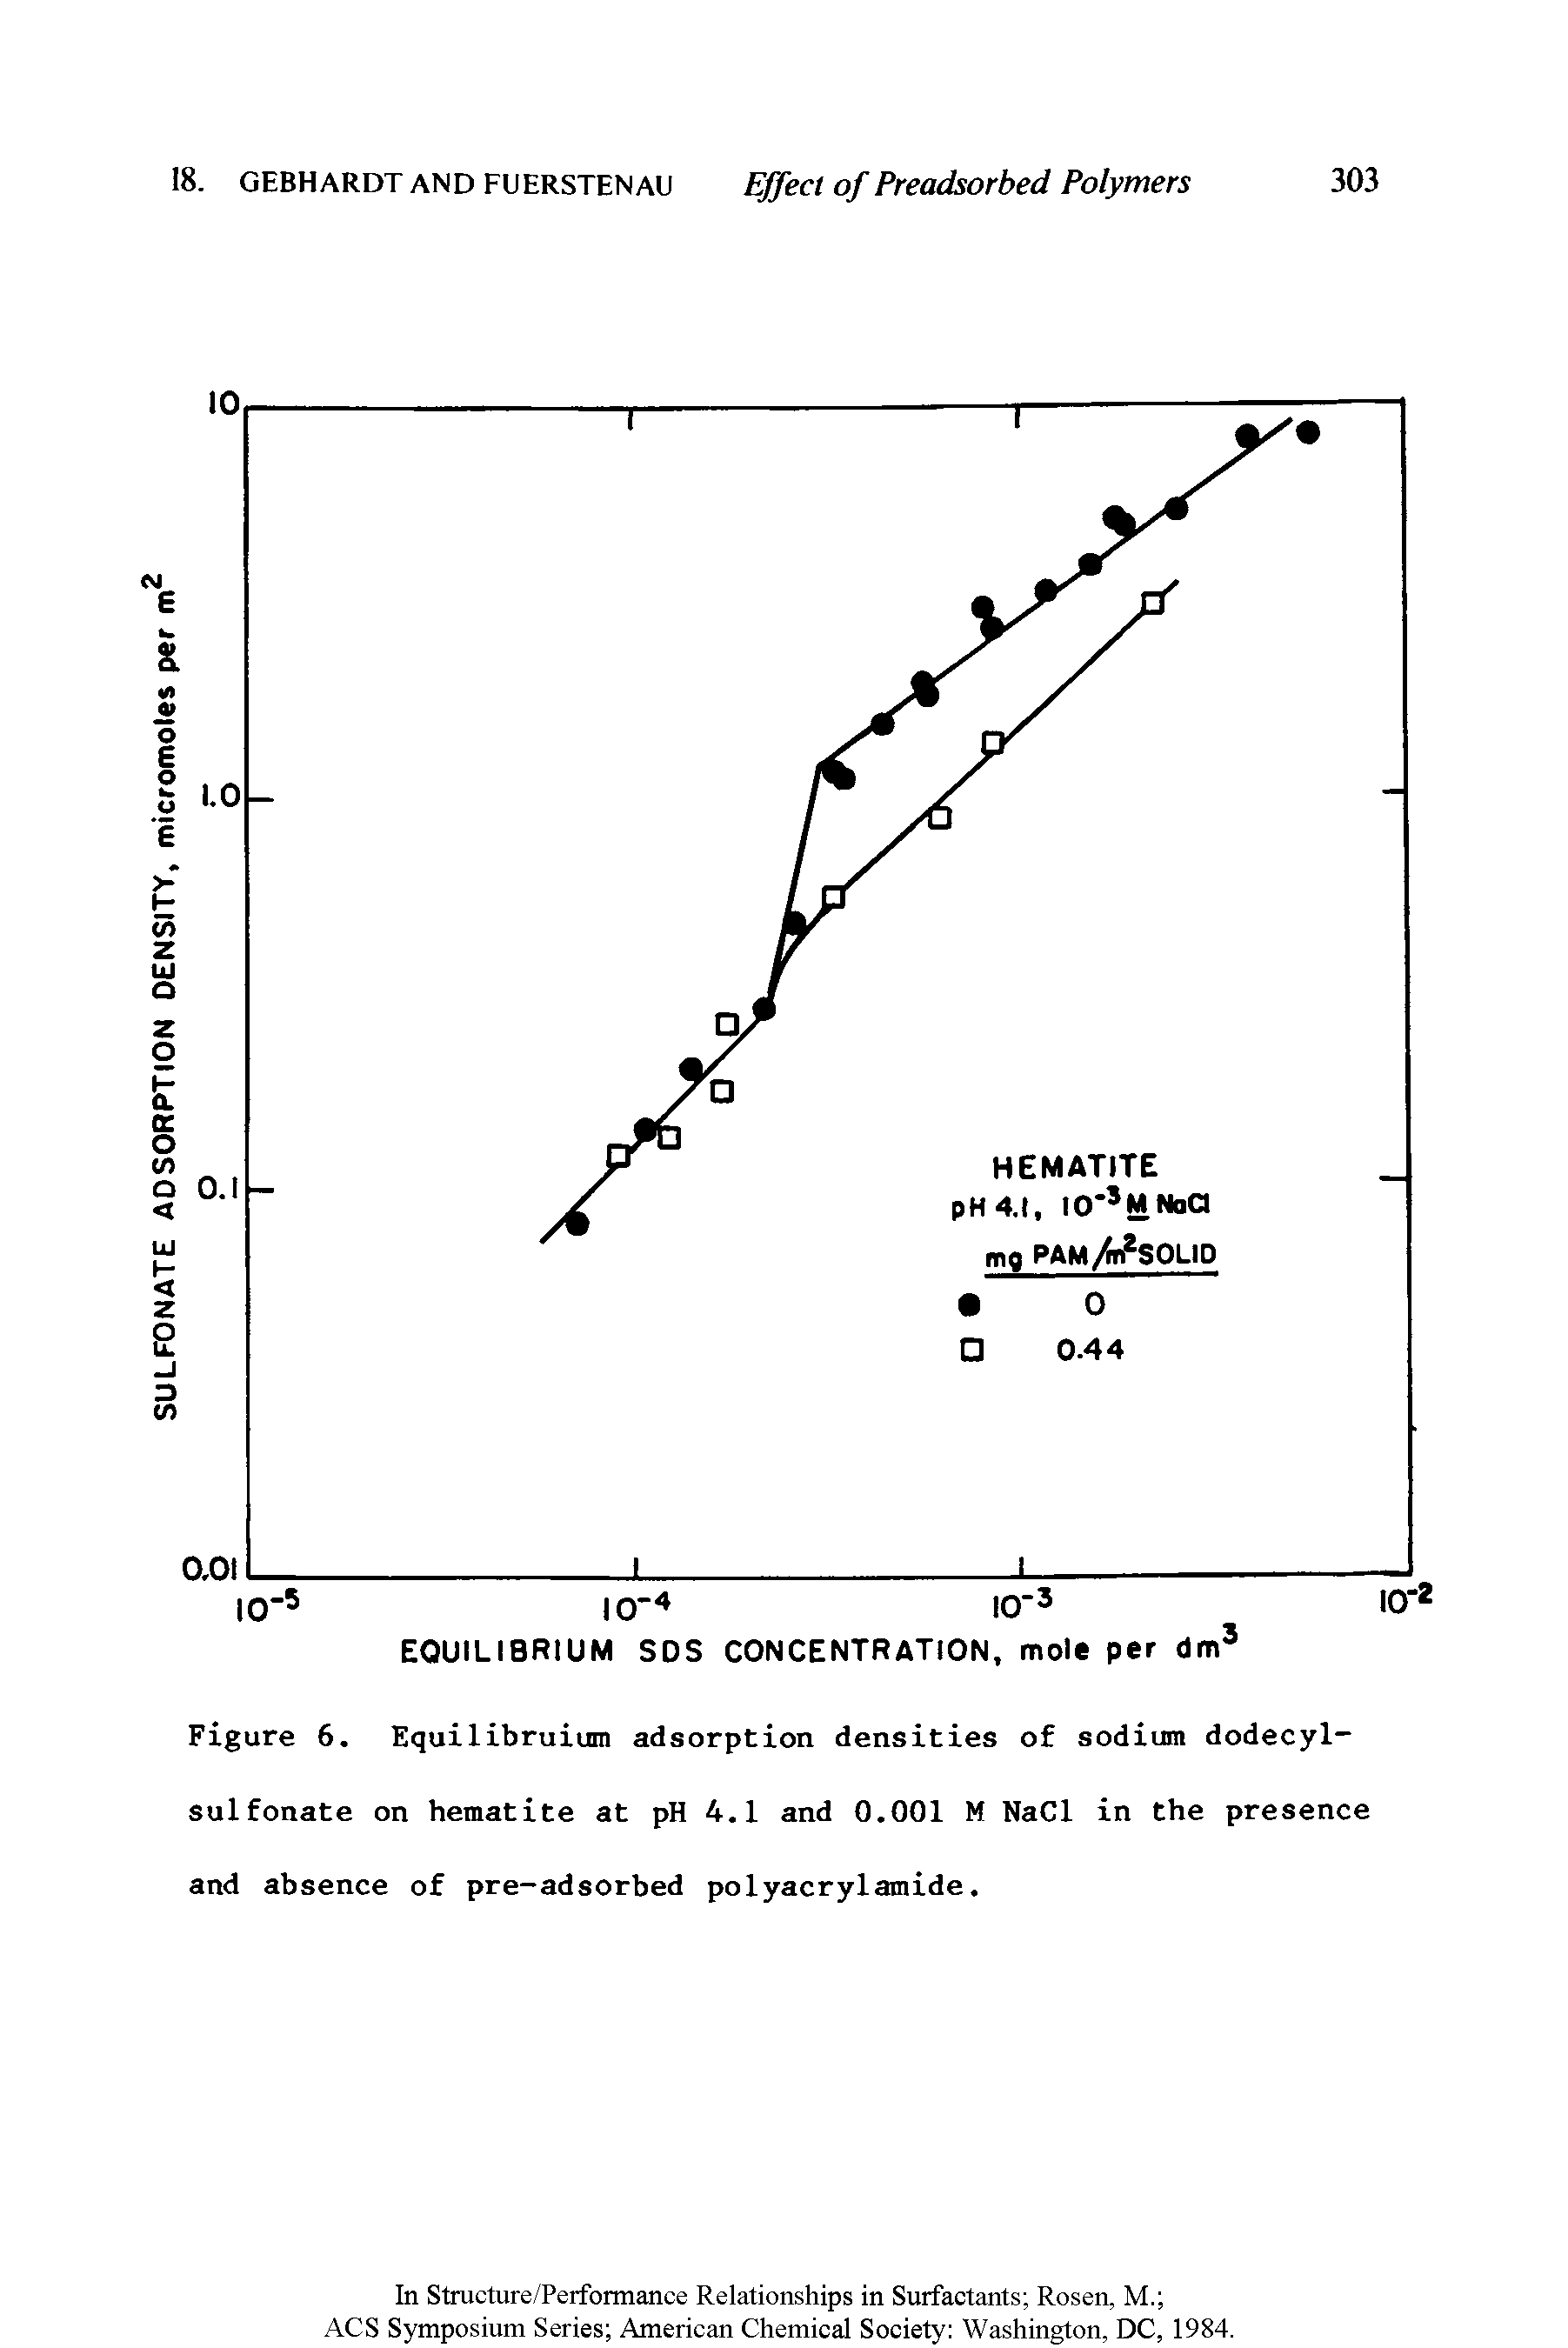 Figure 6. Equilibruium adsorption densities of sodium dodecyl-sulfonate on hematite at pH 4.1 and 0.001 M NaCl in the presence and absence of pre-adsorbed polyacrylamide.